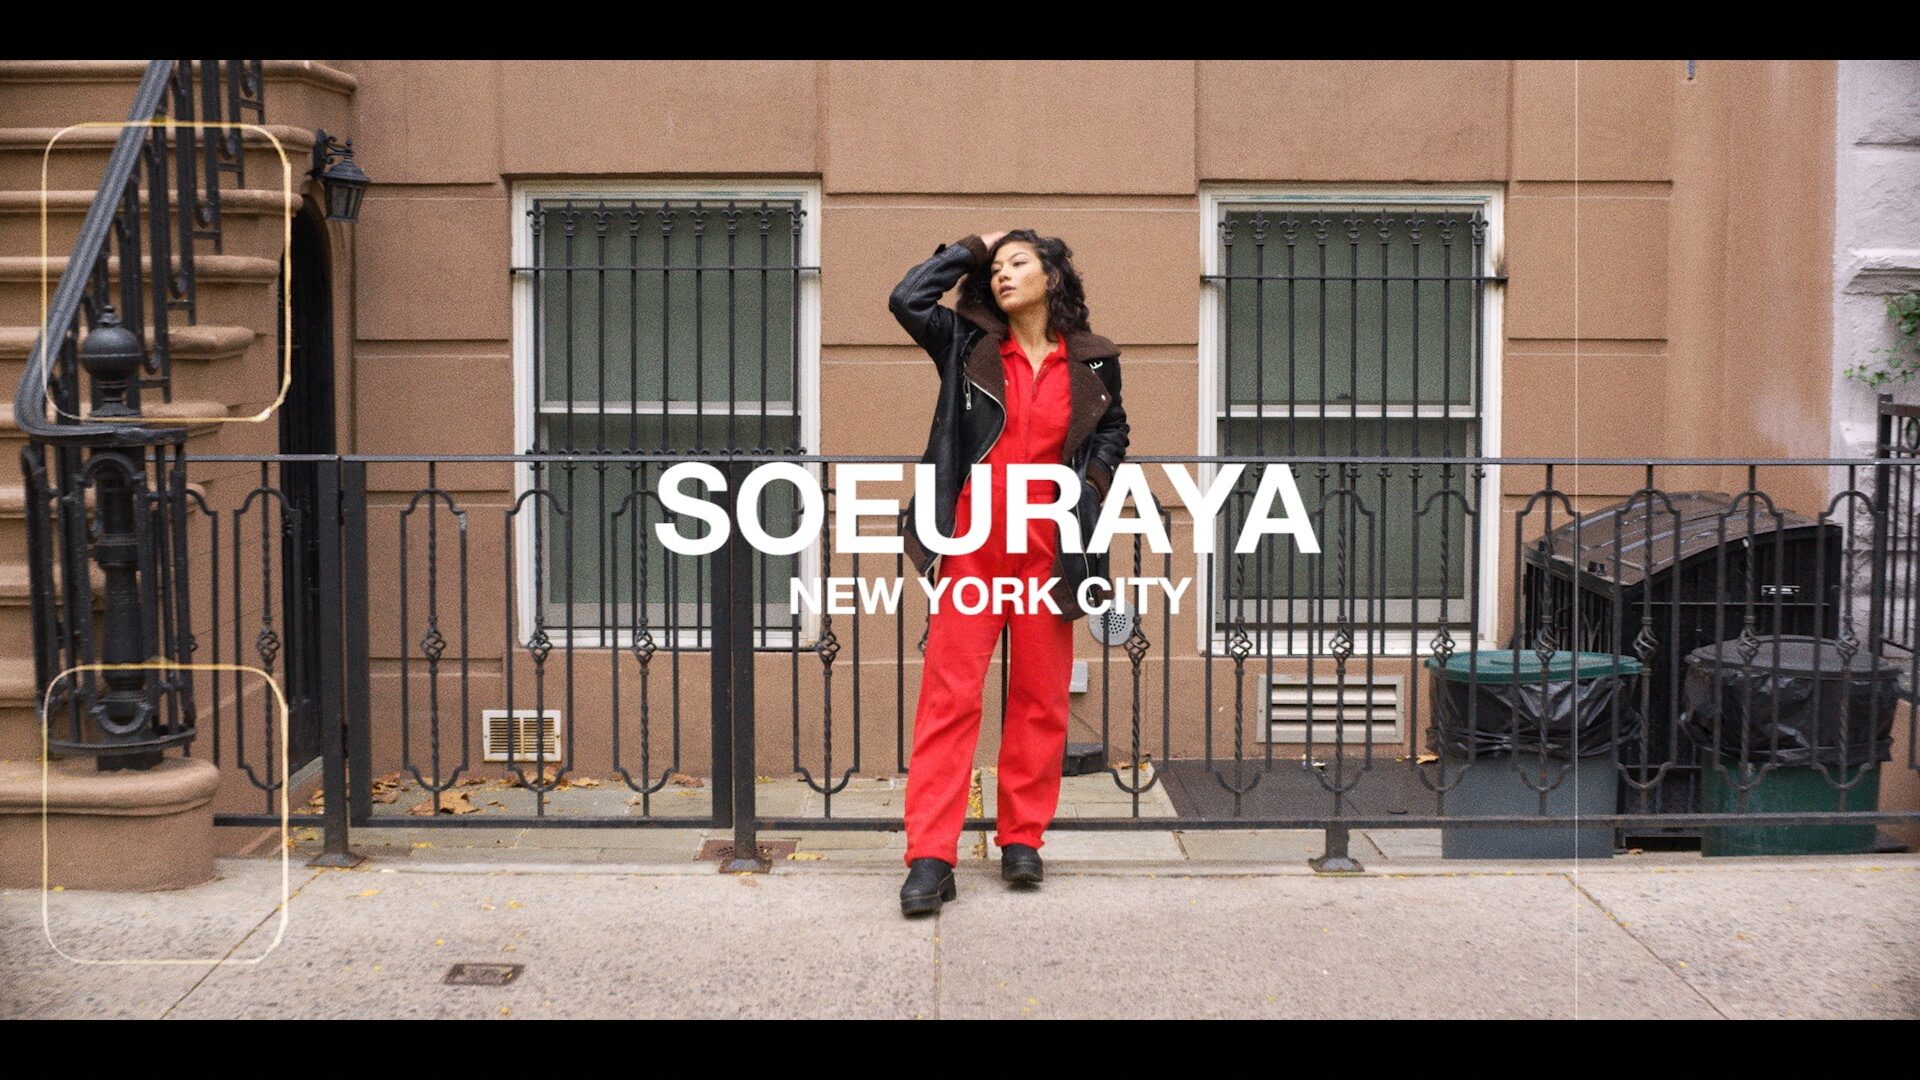 Soureya, poised and stylish in red jumpsuit and black jacket, stands confidently on a New York City street, embodying the urban energy and personal empowerment central to the SoulCycle Docufilm narrative